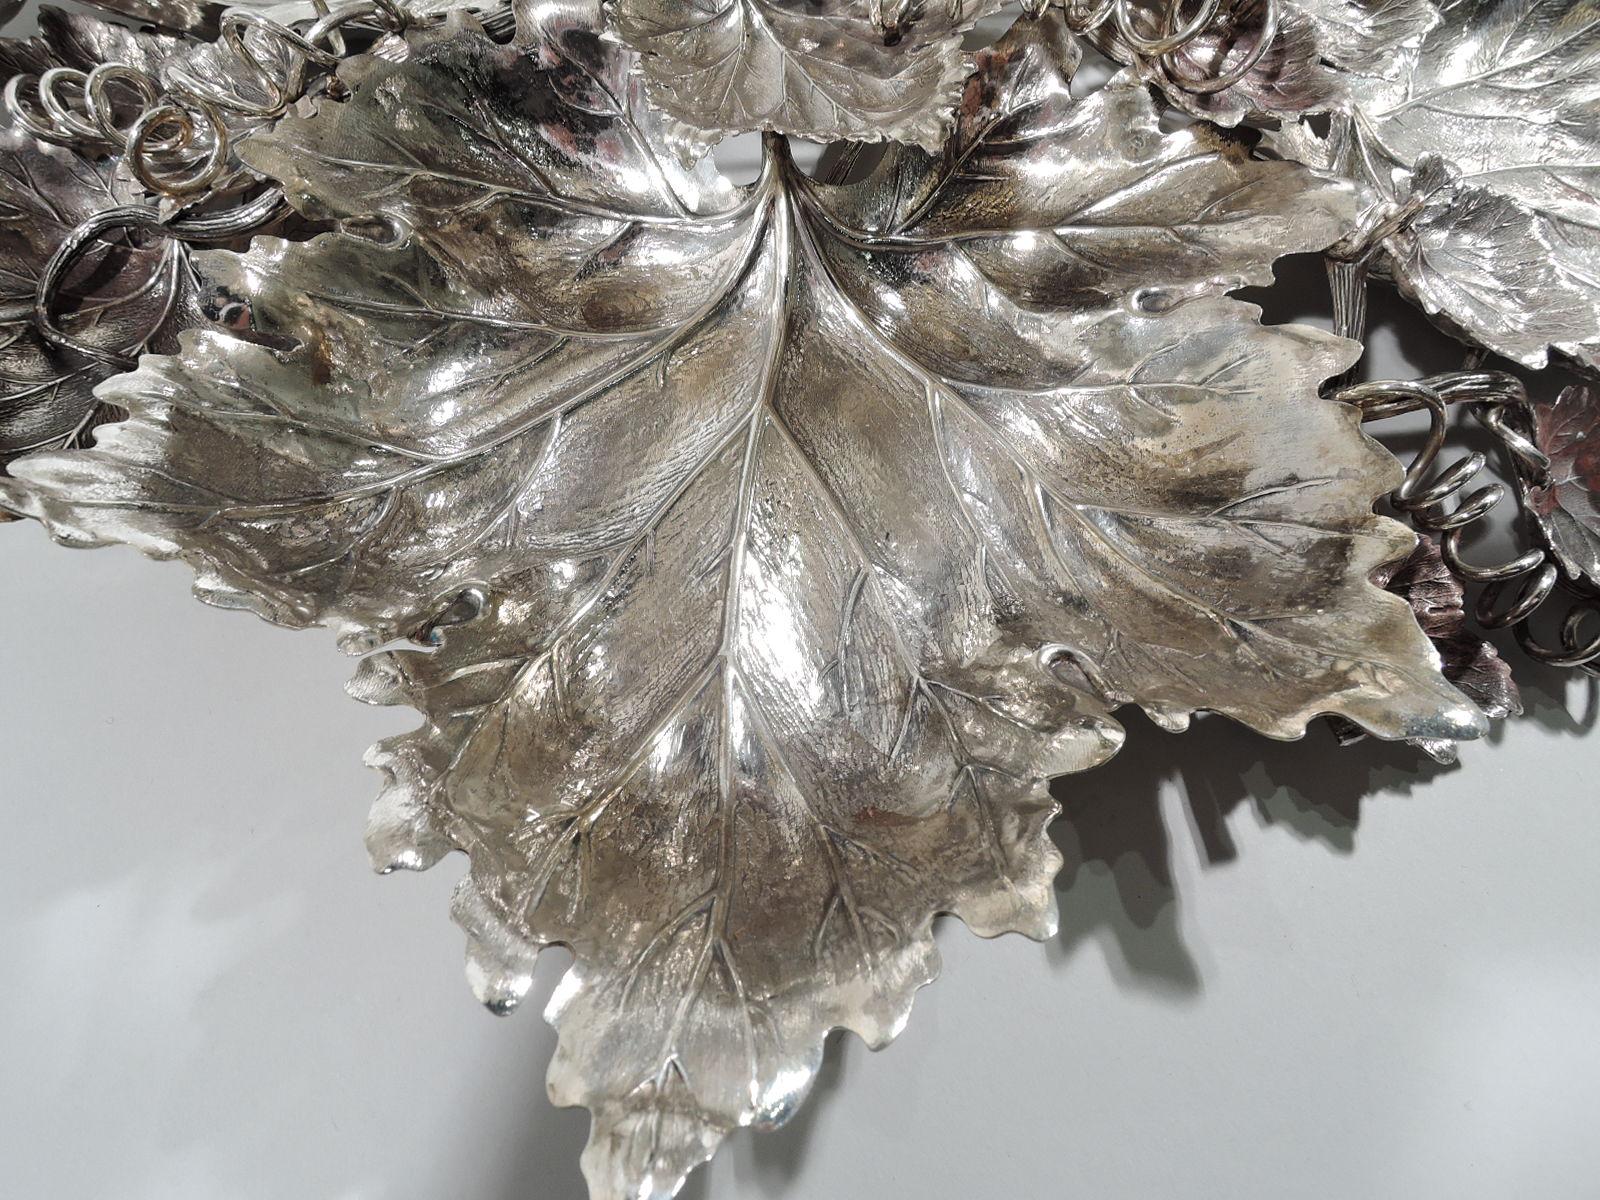 Buccellati Sterling Silver Leaf and Branch 3-Tier Serving Stand 4